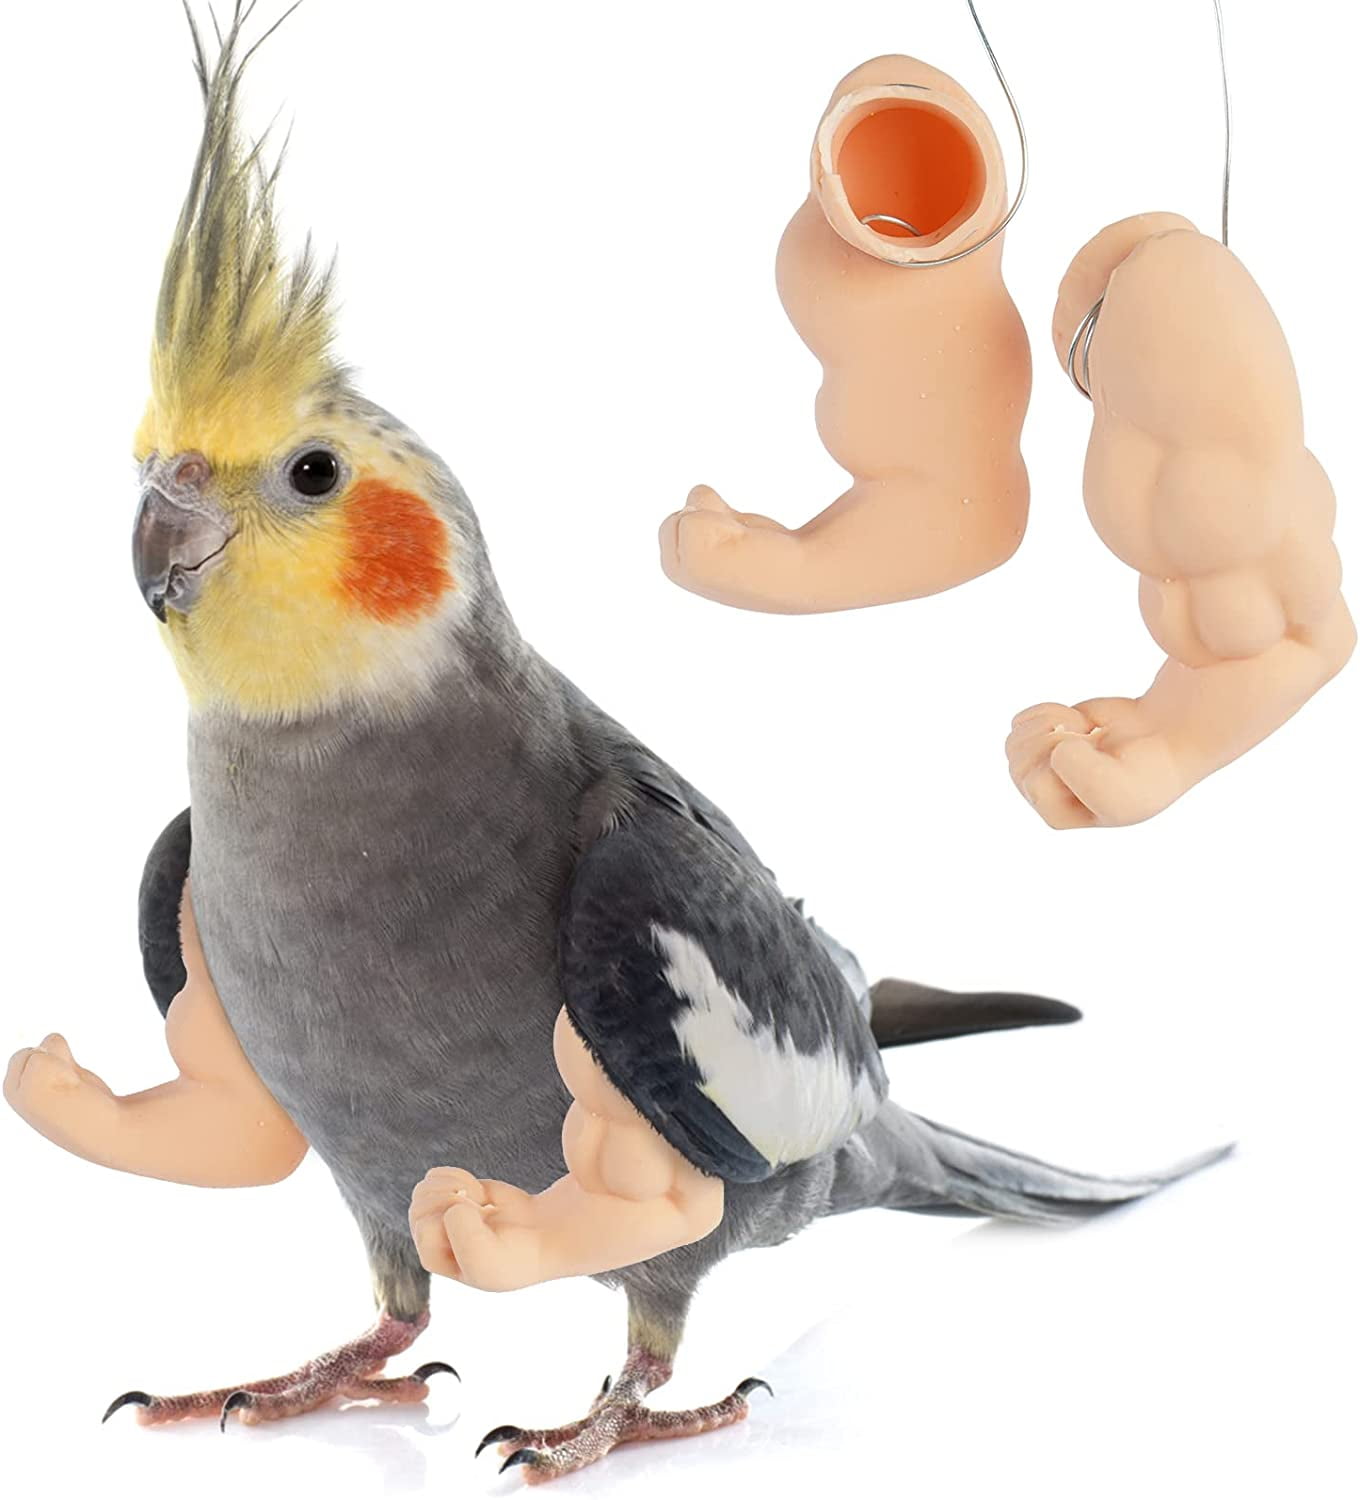 Chicken Arms Toy Chicken Arms Gift Arms Pranks Toy Halloween